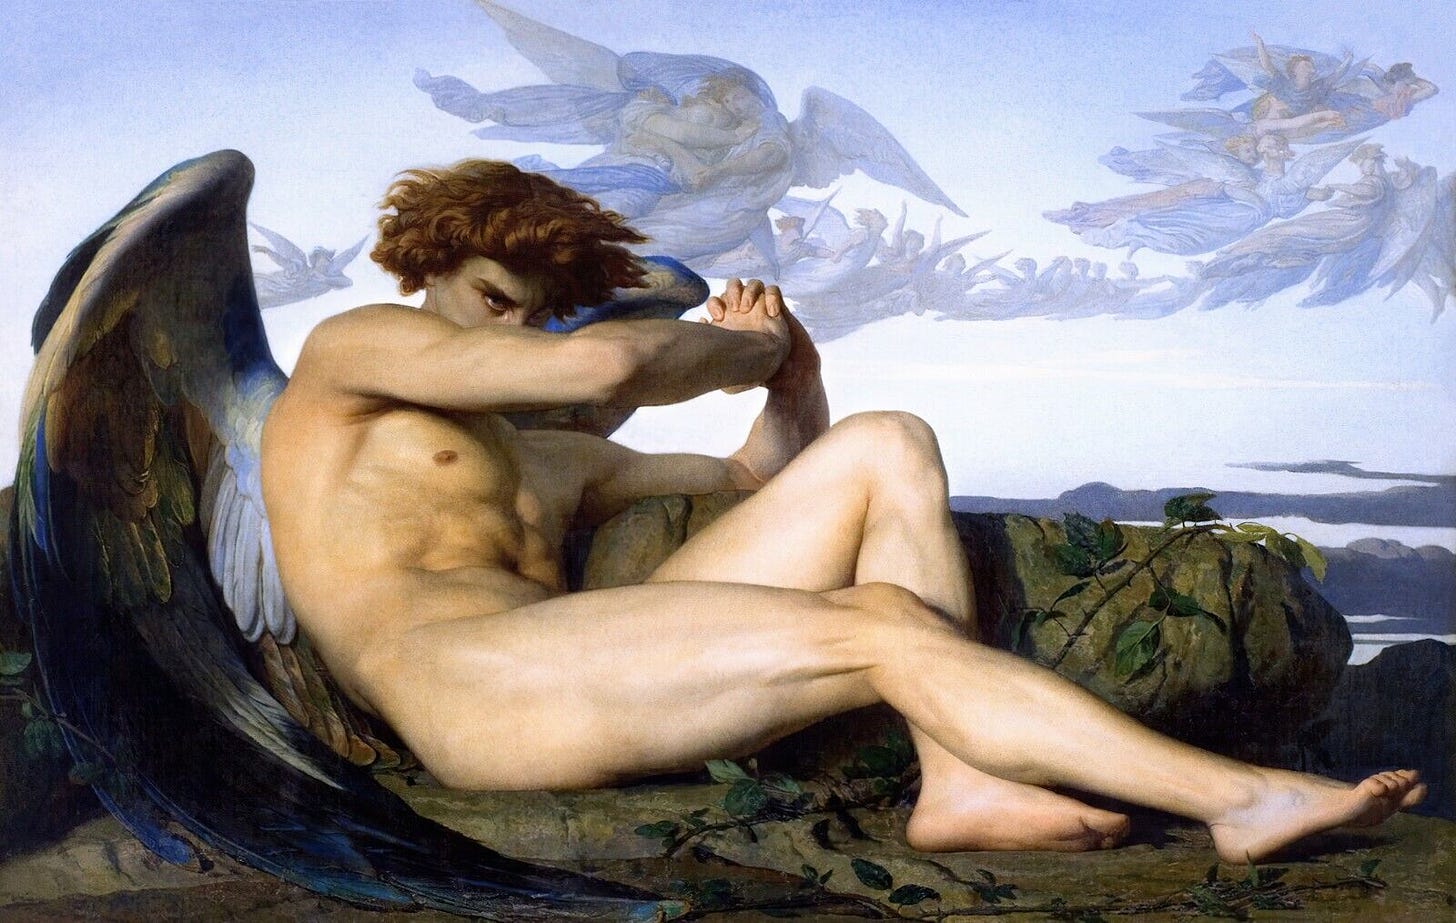 Alexandre Cabanel Fallen Angel 1847 Painting Print Poster Wall Art Picture  A4 + | eBay